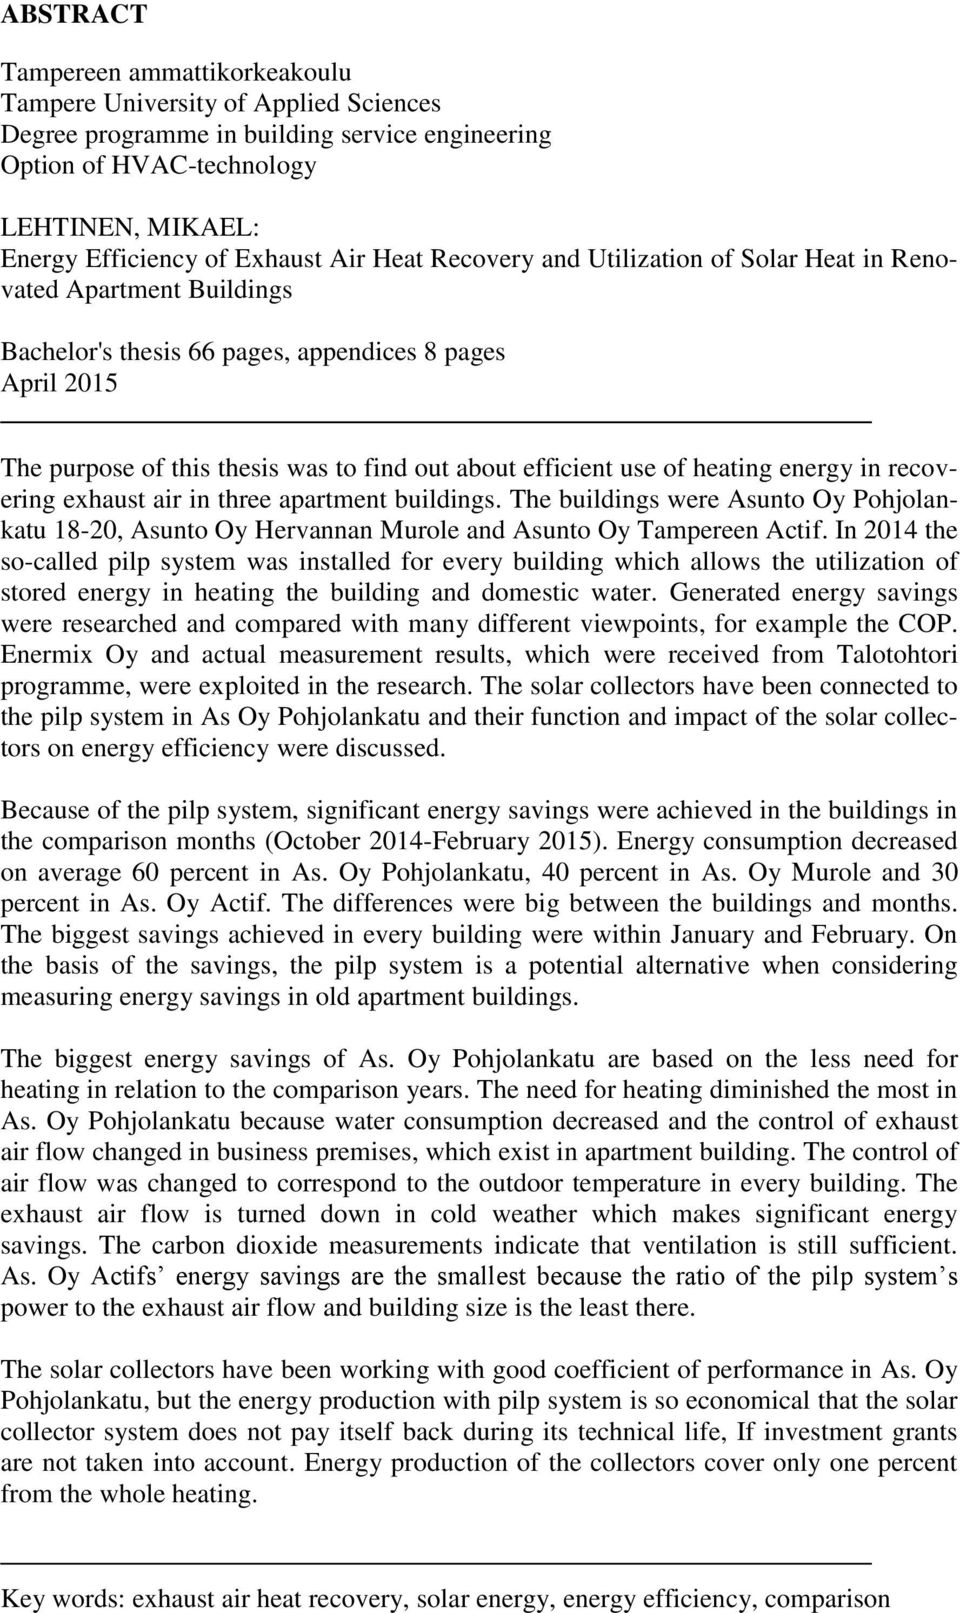 use of heating energy in recovering exhaust air in three apartment buildings. The buildings were Asunto Oy Pohjolankatu 18-20, Asunto Oy Hervannan Murole and Asunto Oy Tampereen Actif.